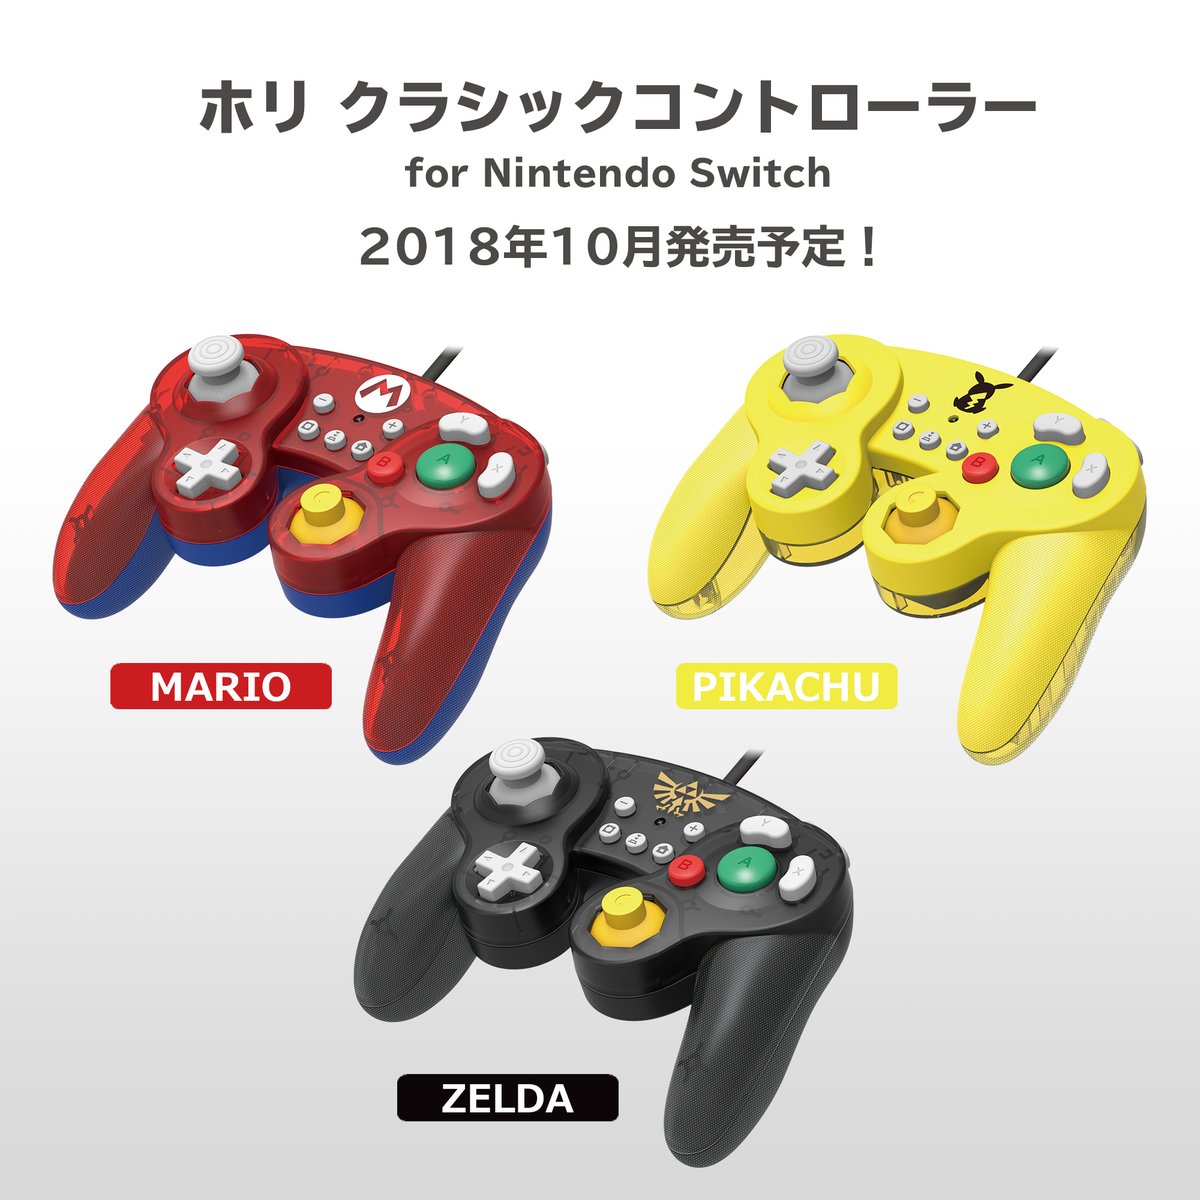 New Zelda-Themed Nintendo Switch Controller Up For Preorder At